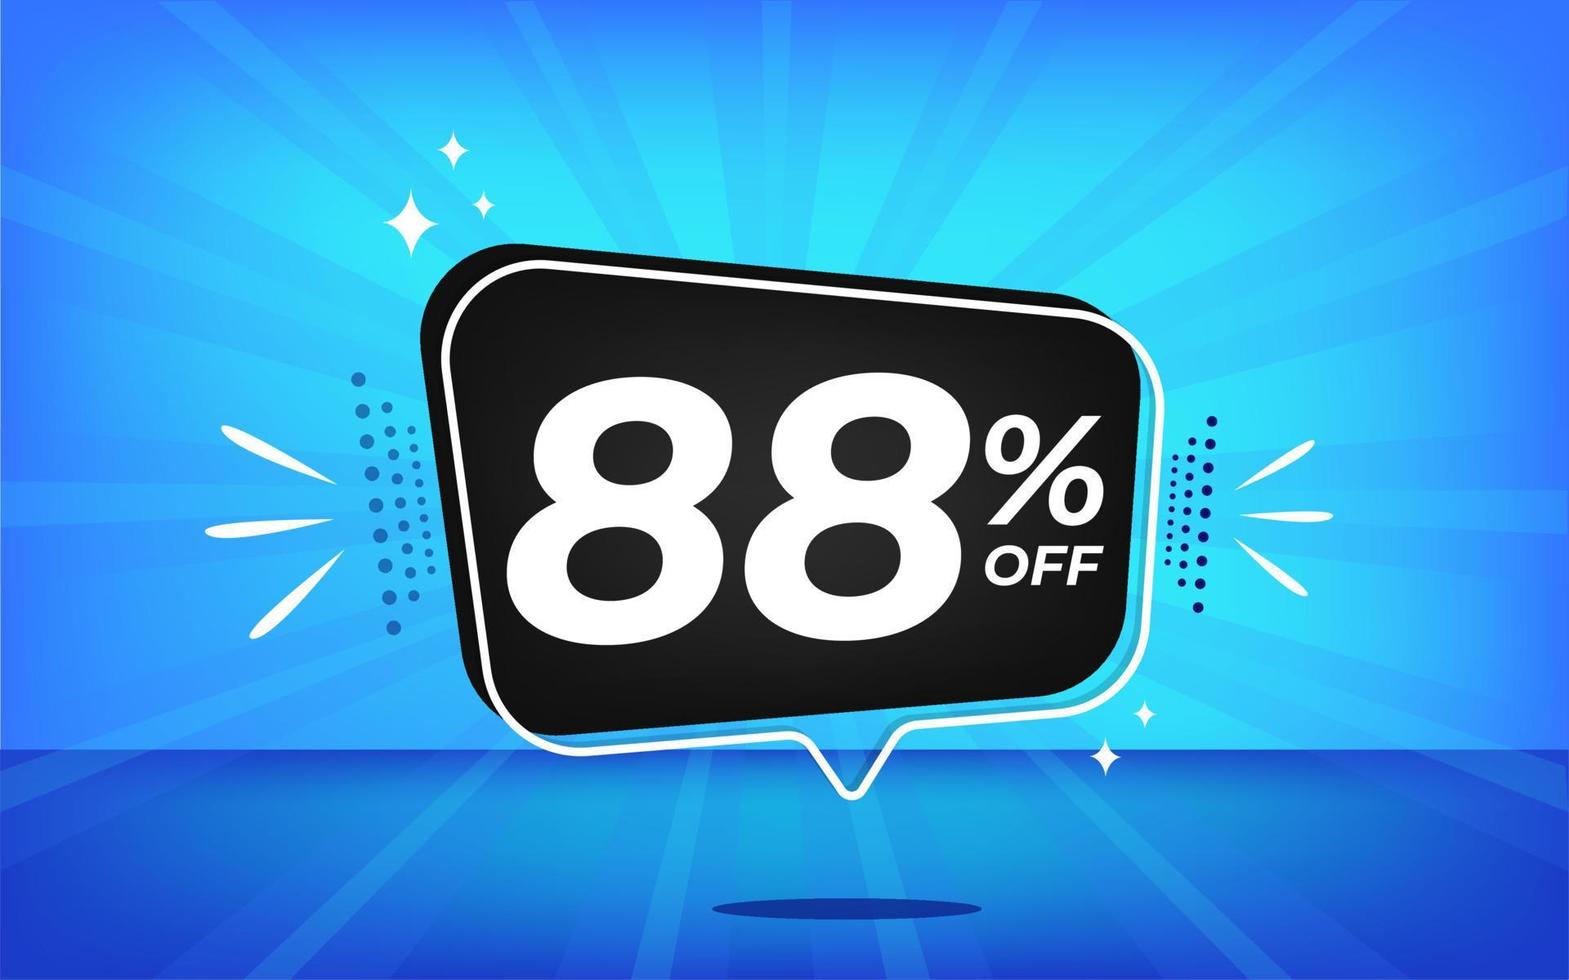 88 percent off. Blue banner with eighty-eight percent discount on a black balloon for mega big sales. vector